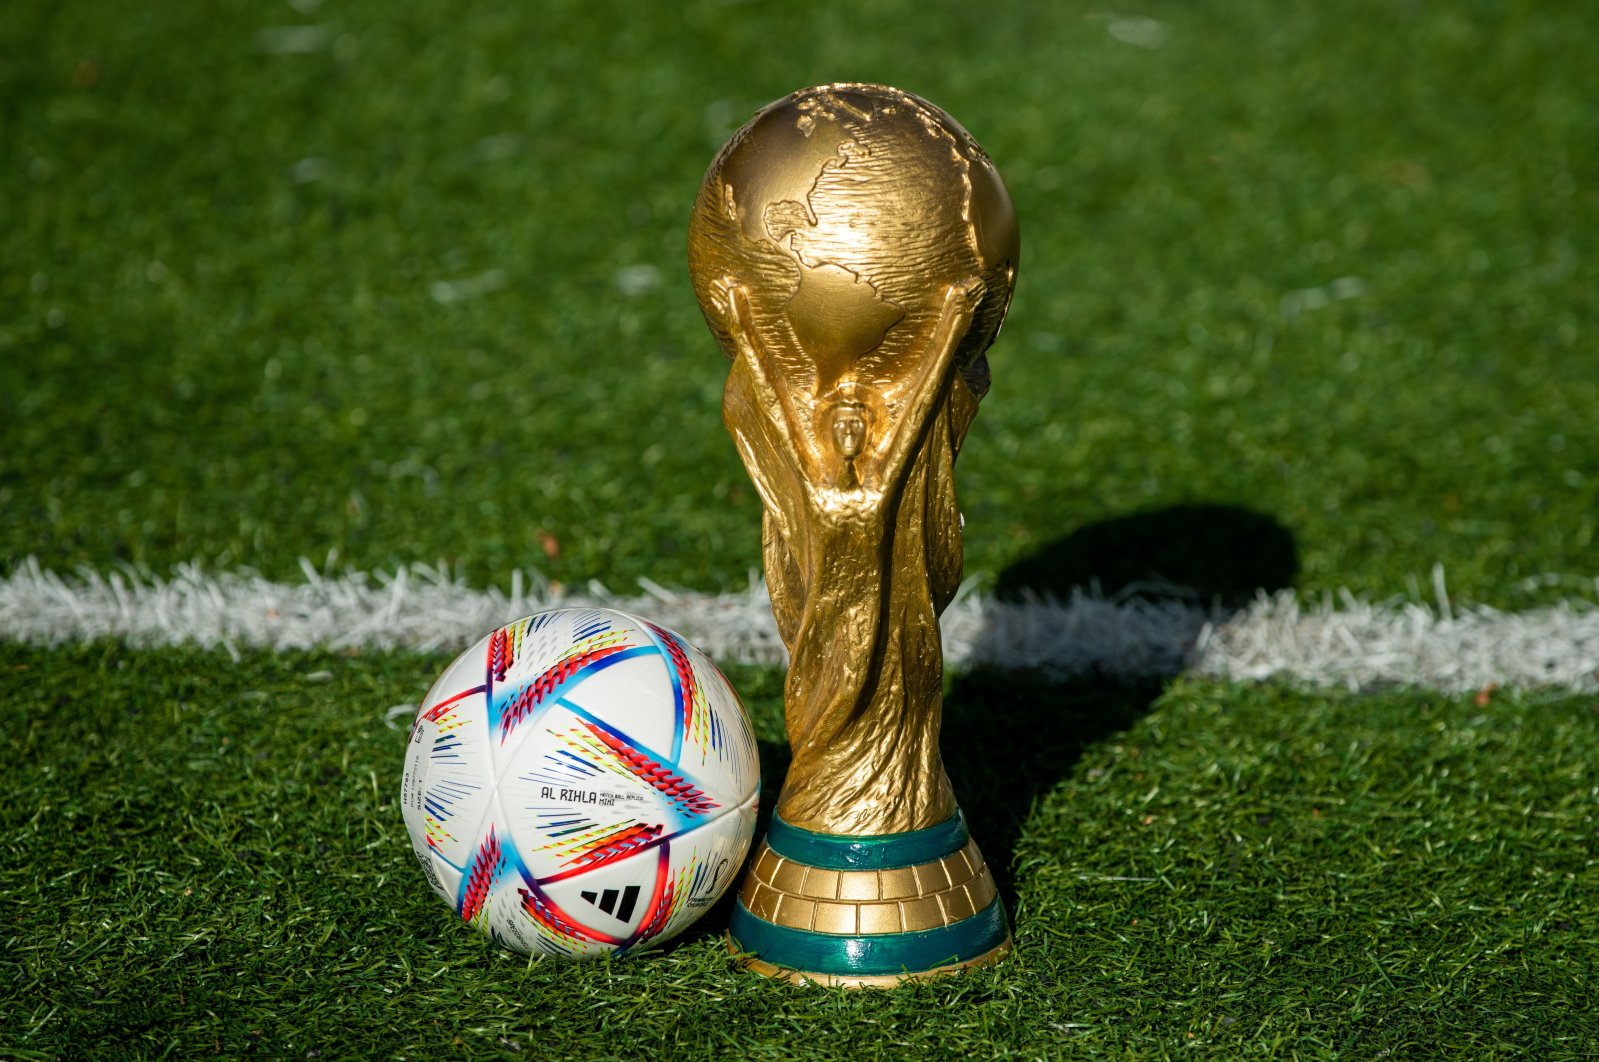 Just completely ignoring everything that is wrong with Qatar 2022 under the pretext of opposing hypocrisy, racism and Islamophobia is, to put it simply, erroneous. (Shutterstock Photo)